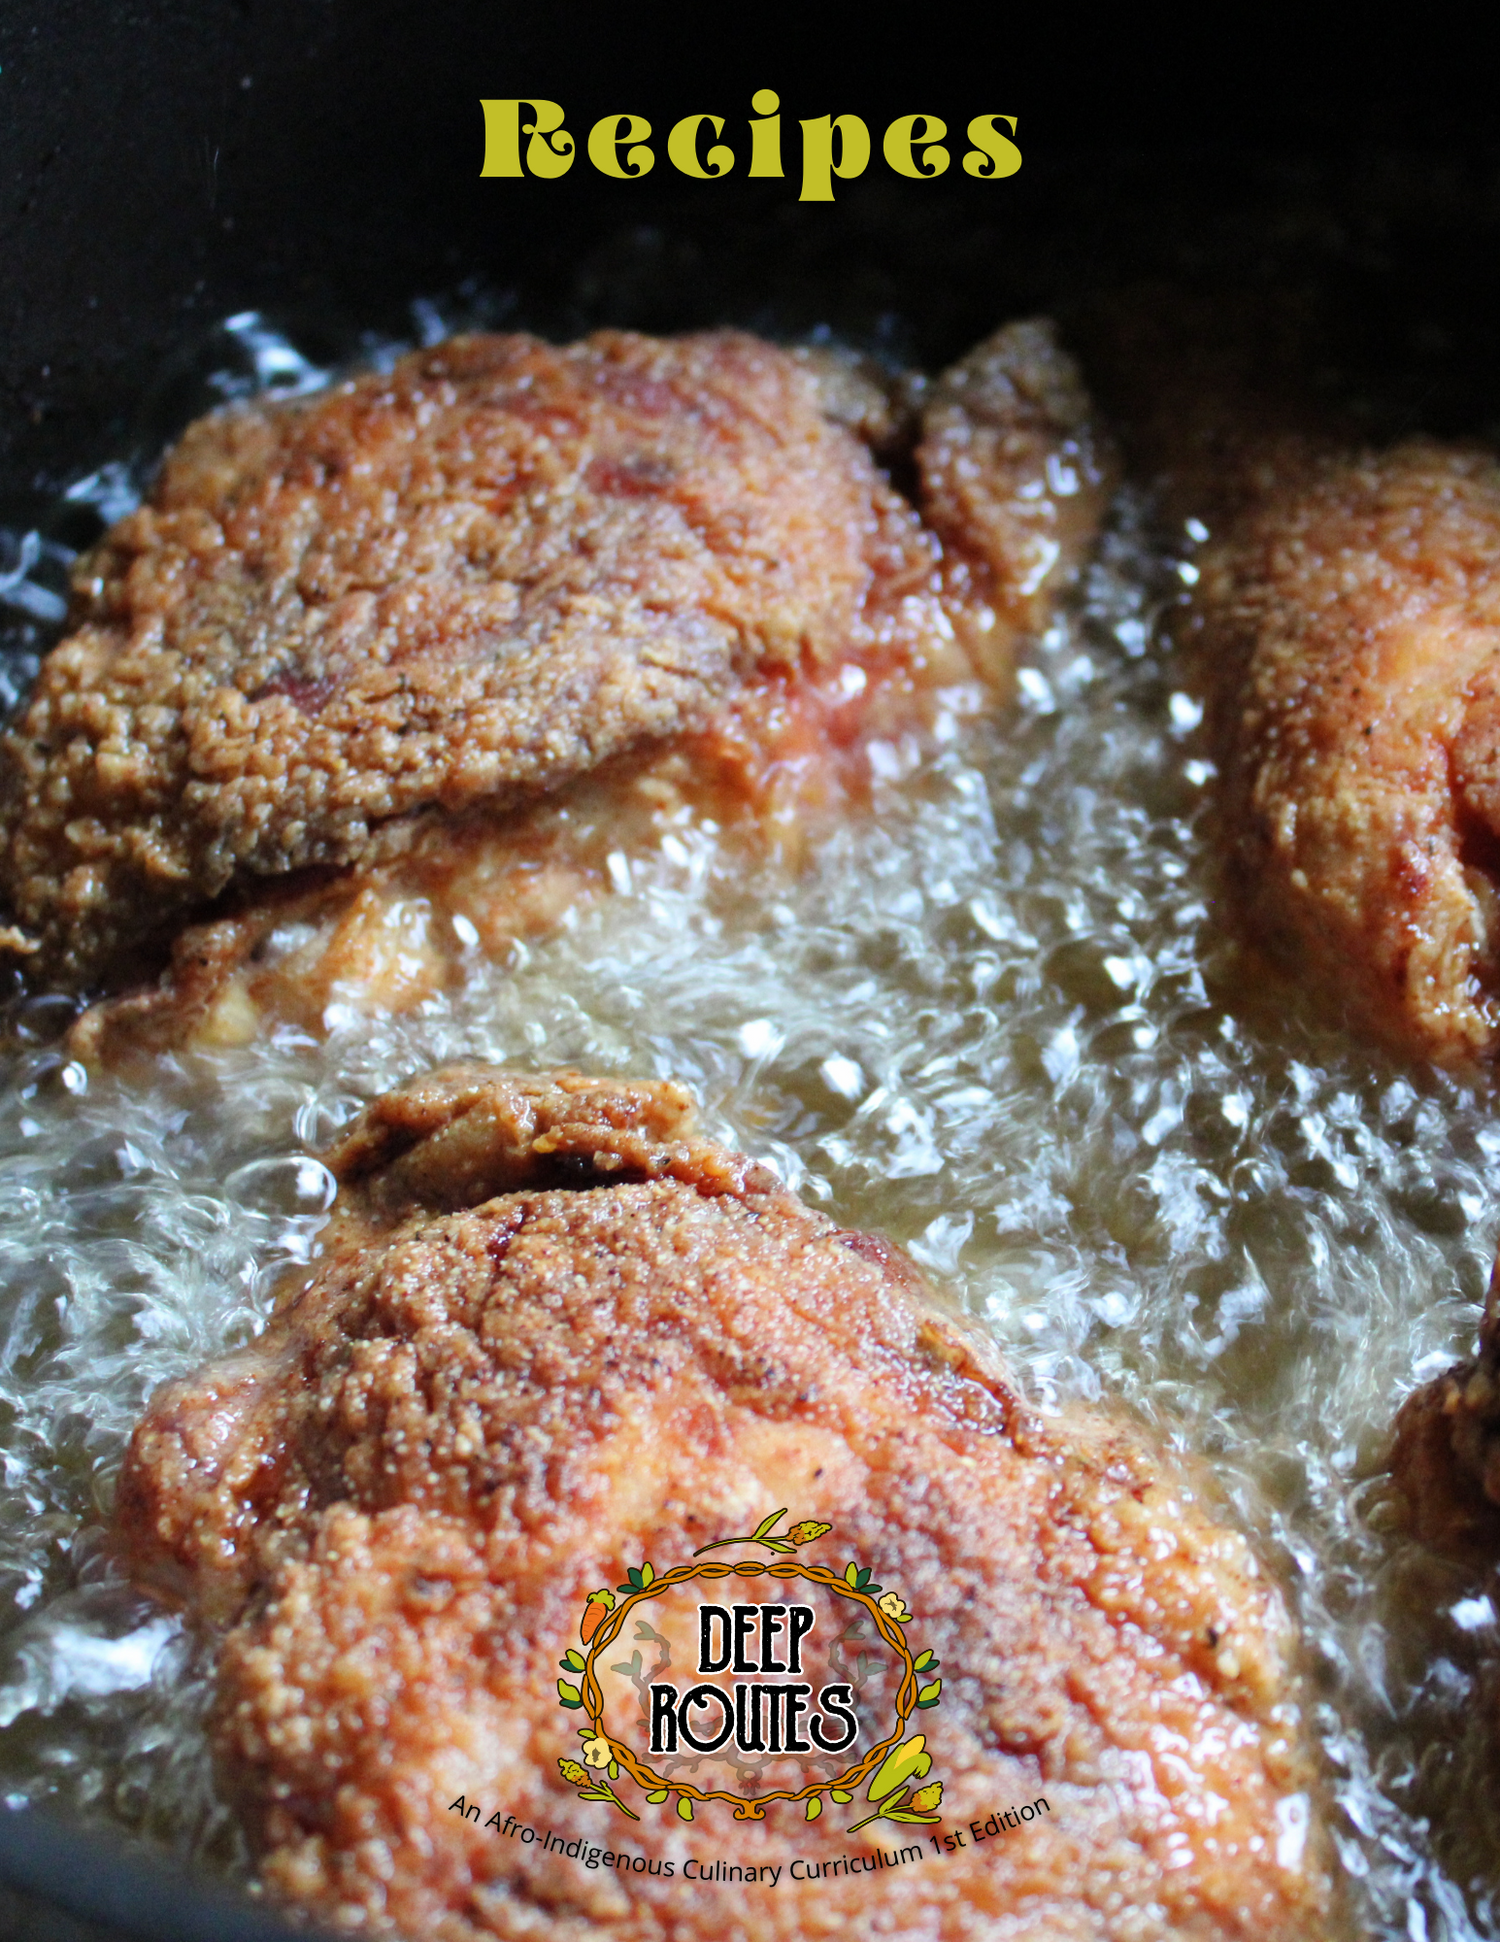 Recipe collection cover with a close up shot of golden fried chicken bubbling in a pot.